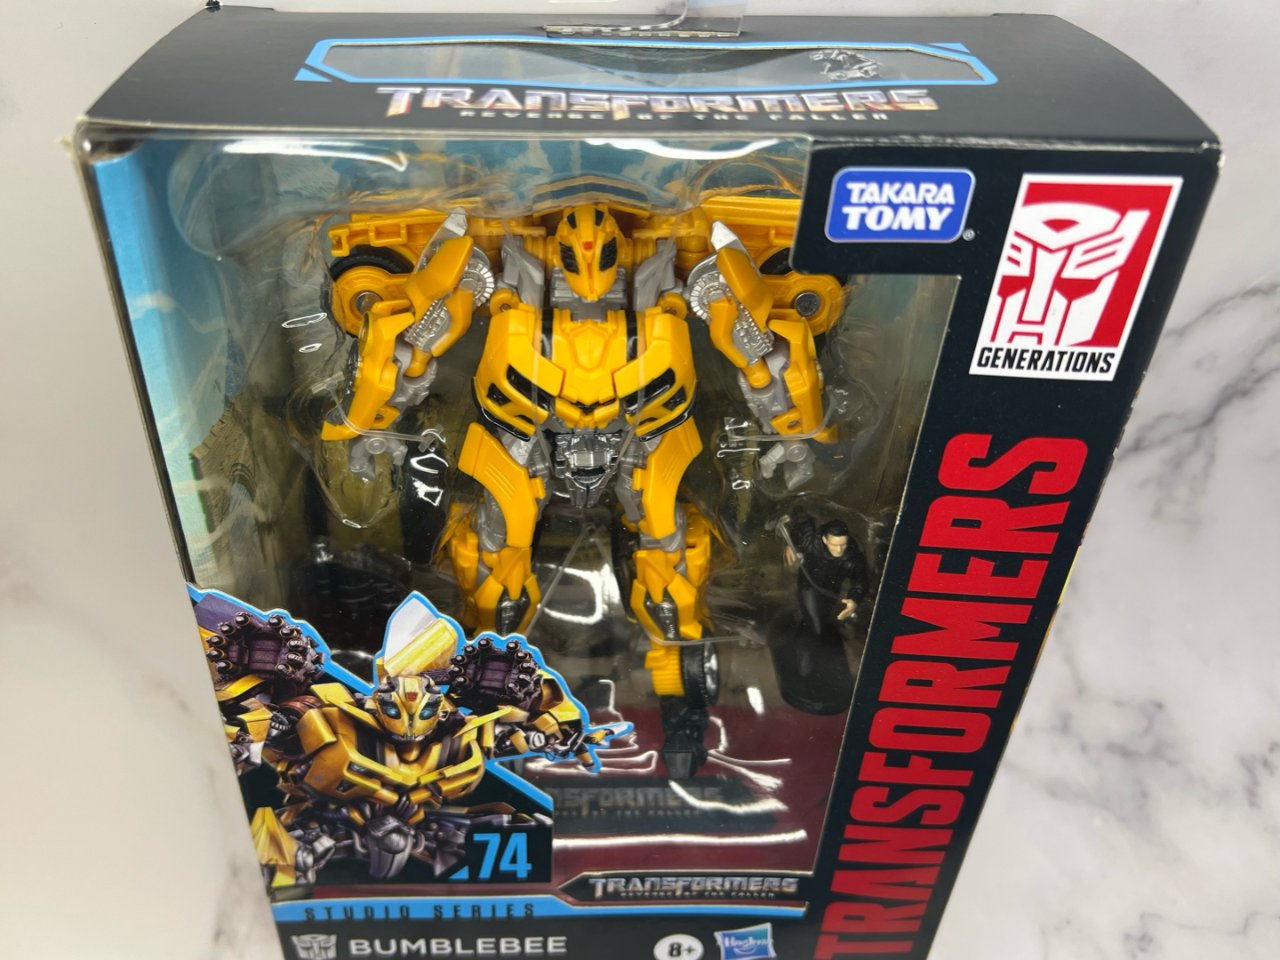 Transformers Toys Studio Series 74 Deluxe Class Revenge of The Fallen Bumblebee & Sam Witwicky Figure, Ages 8 and Up, 4.5-inch : Toys & Games